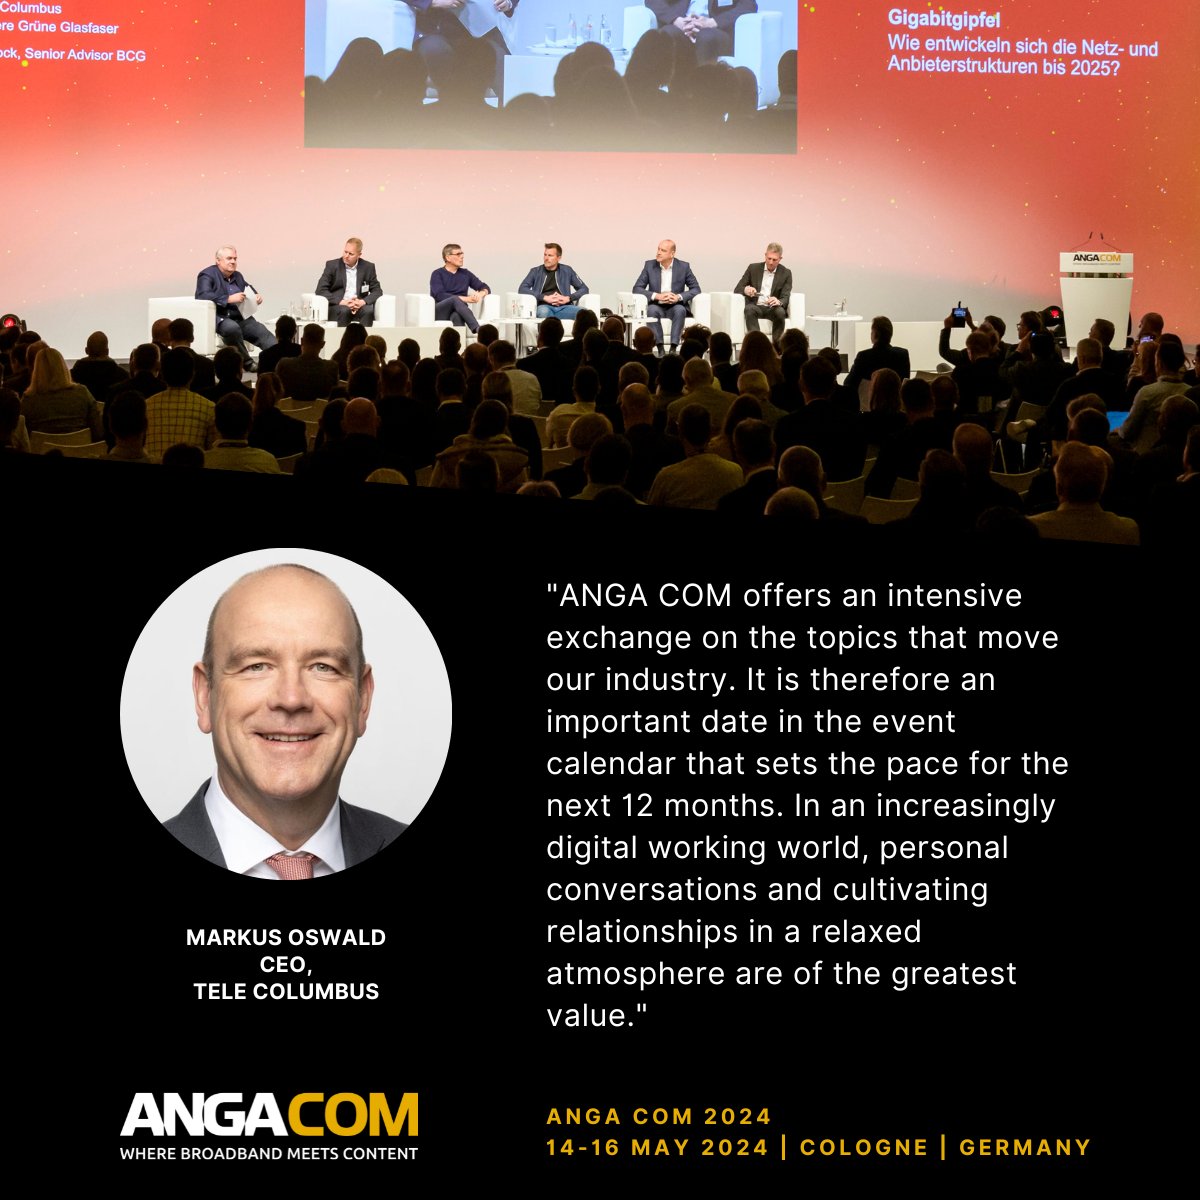 Markus Oswald, CEO @TeleColumbusAG on #ANGACOM 2023: 'ANGA COM offers an intensive exchange on the topics that move our industry. It is therefore an important date in the event calendar that sets the pace...'. More from the #broadband and #media industry: tinyurl.com/5bts4k5b